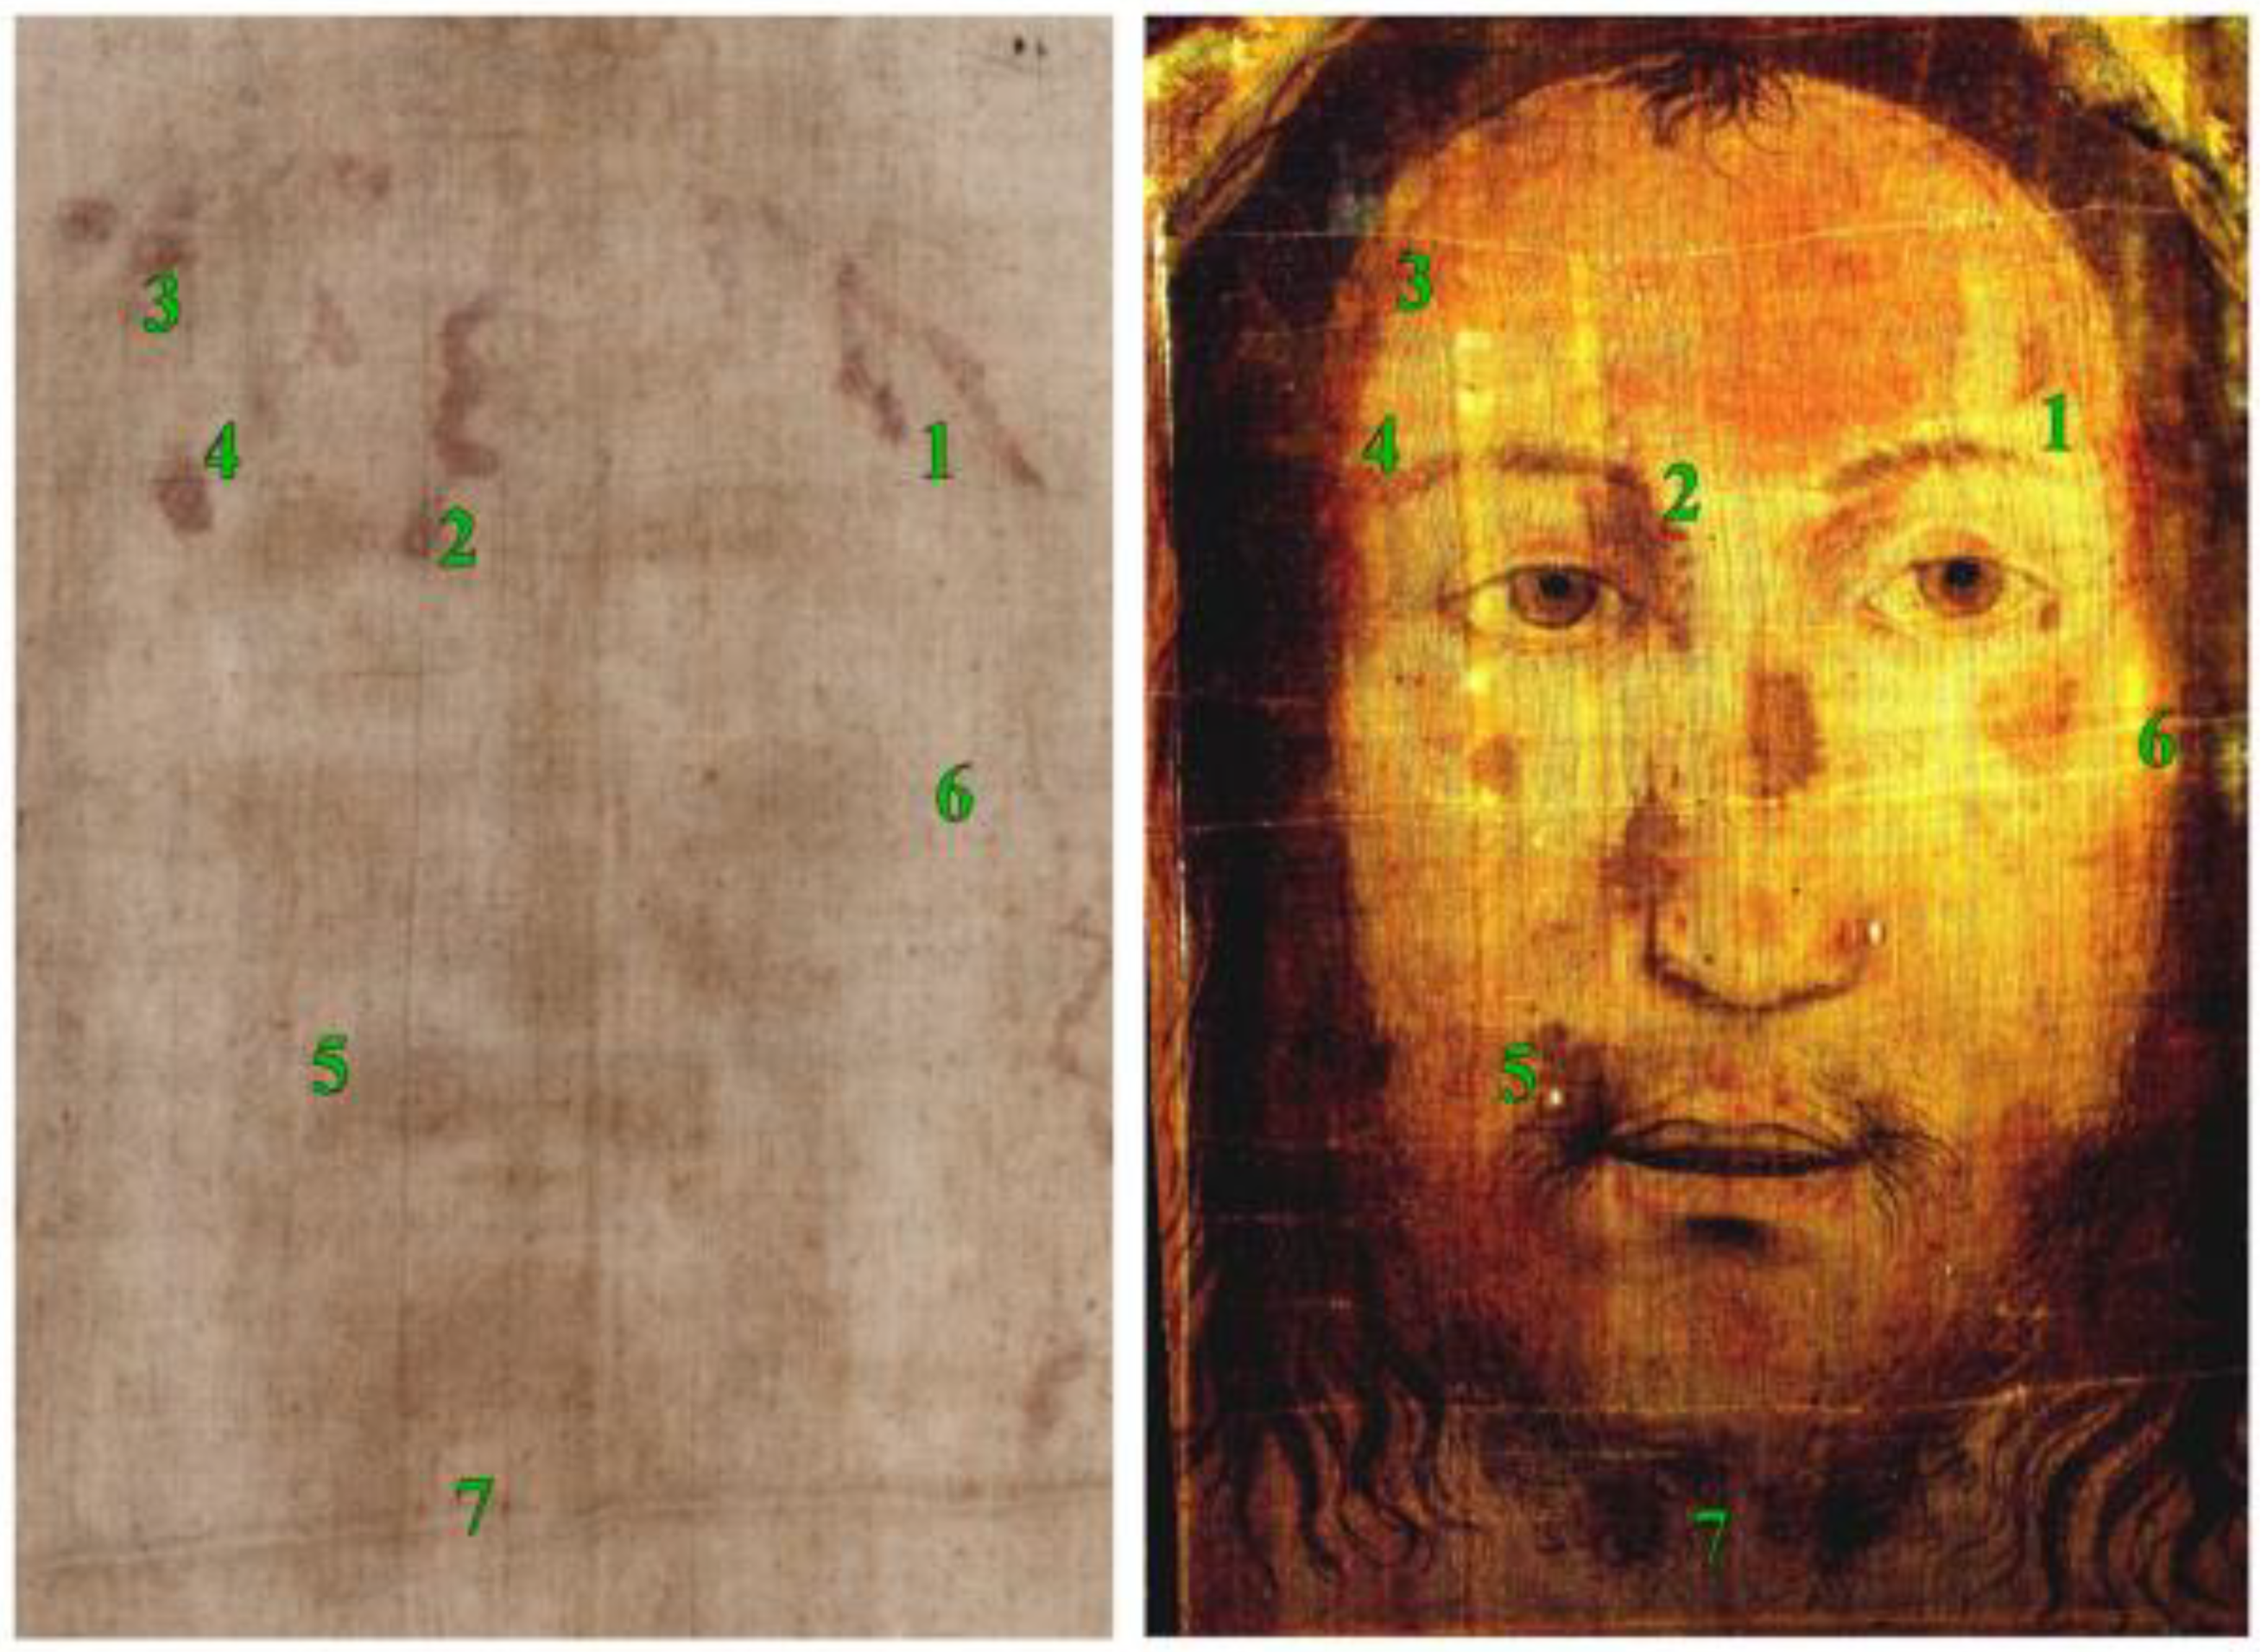 Heritage | Free Full-Text | A Comparison between the Face of the Veil of  Manoppello and the Face of the Shroud of Turin